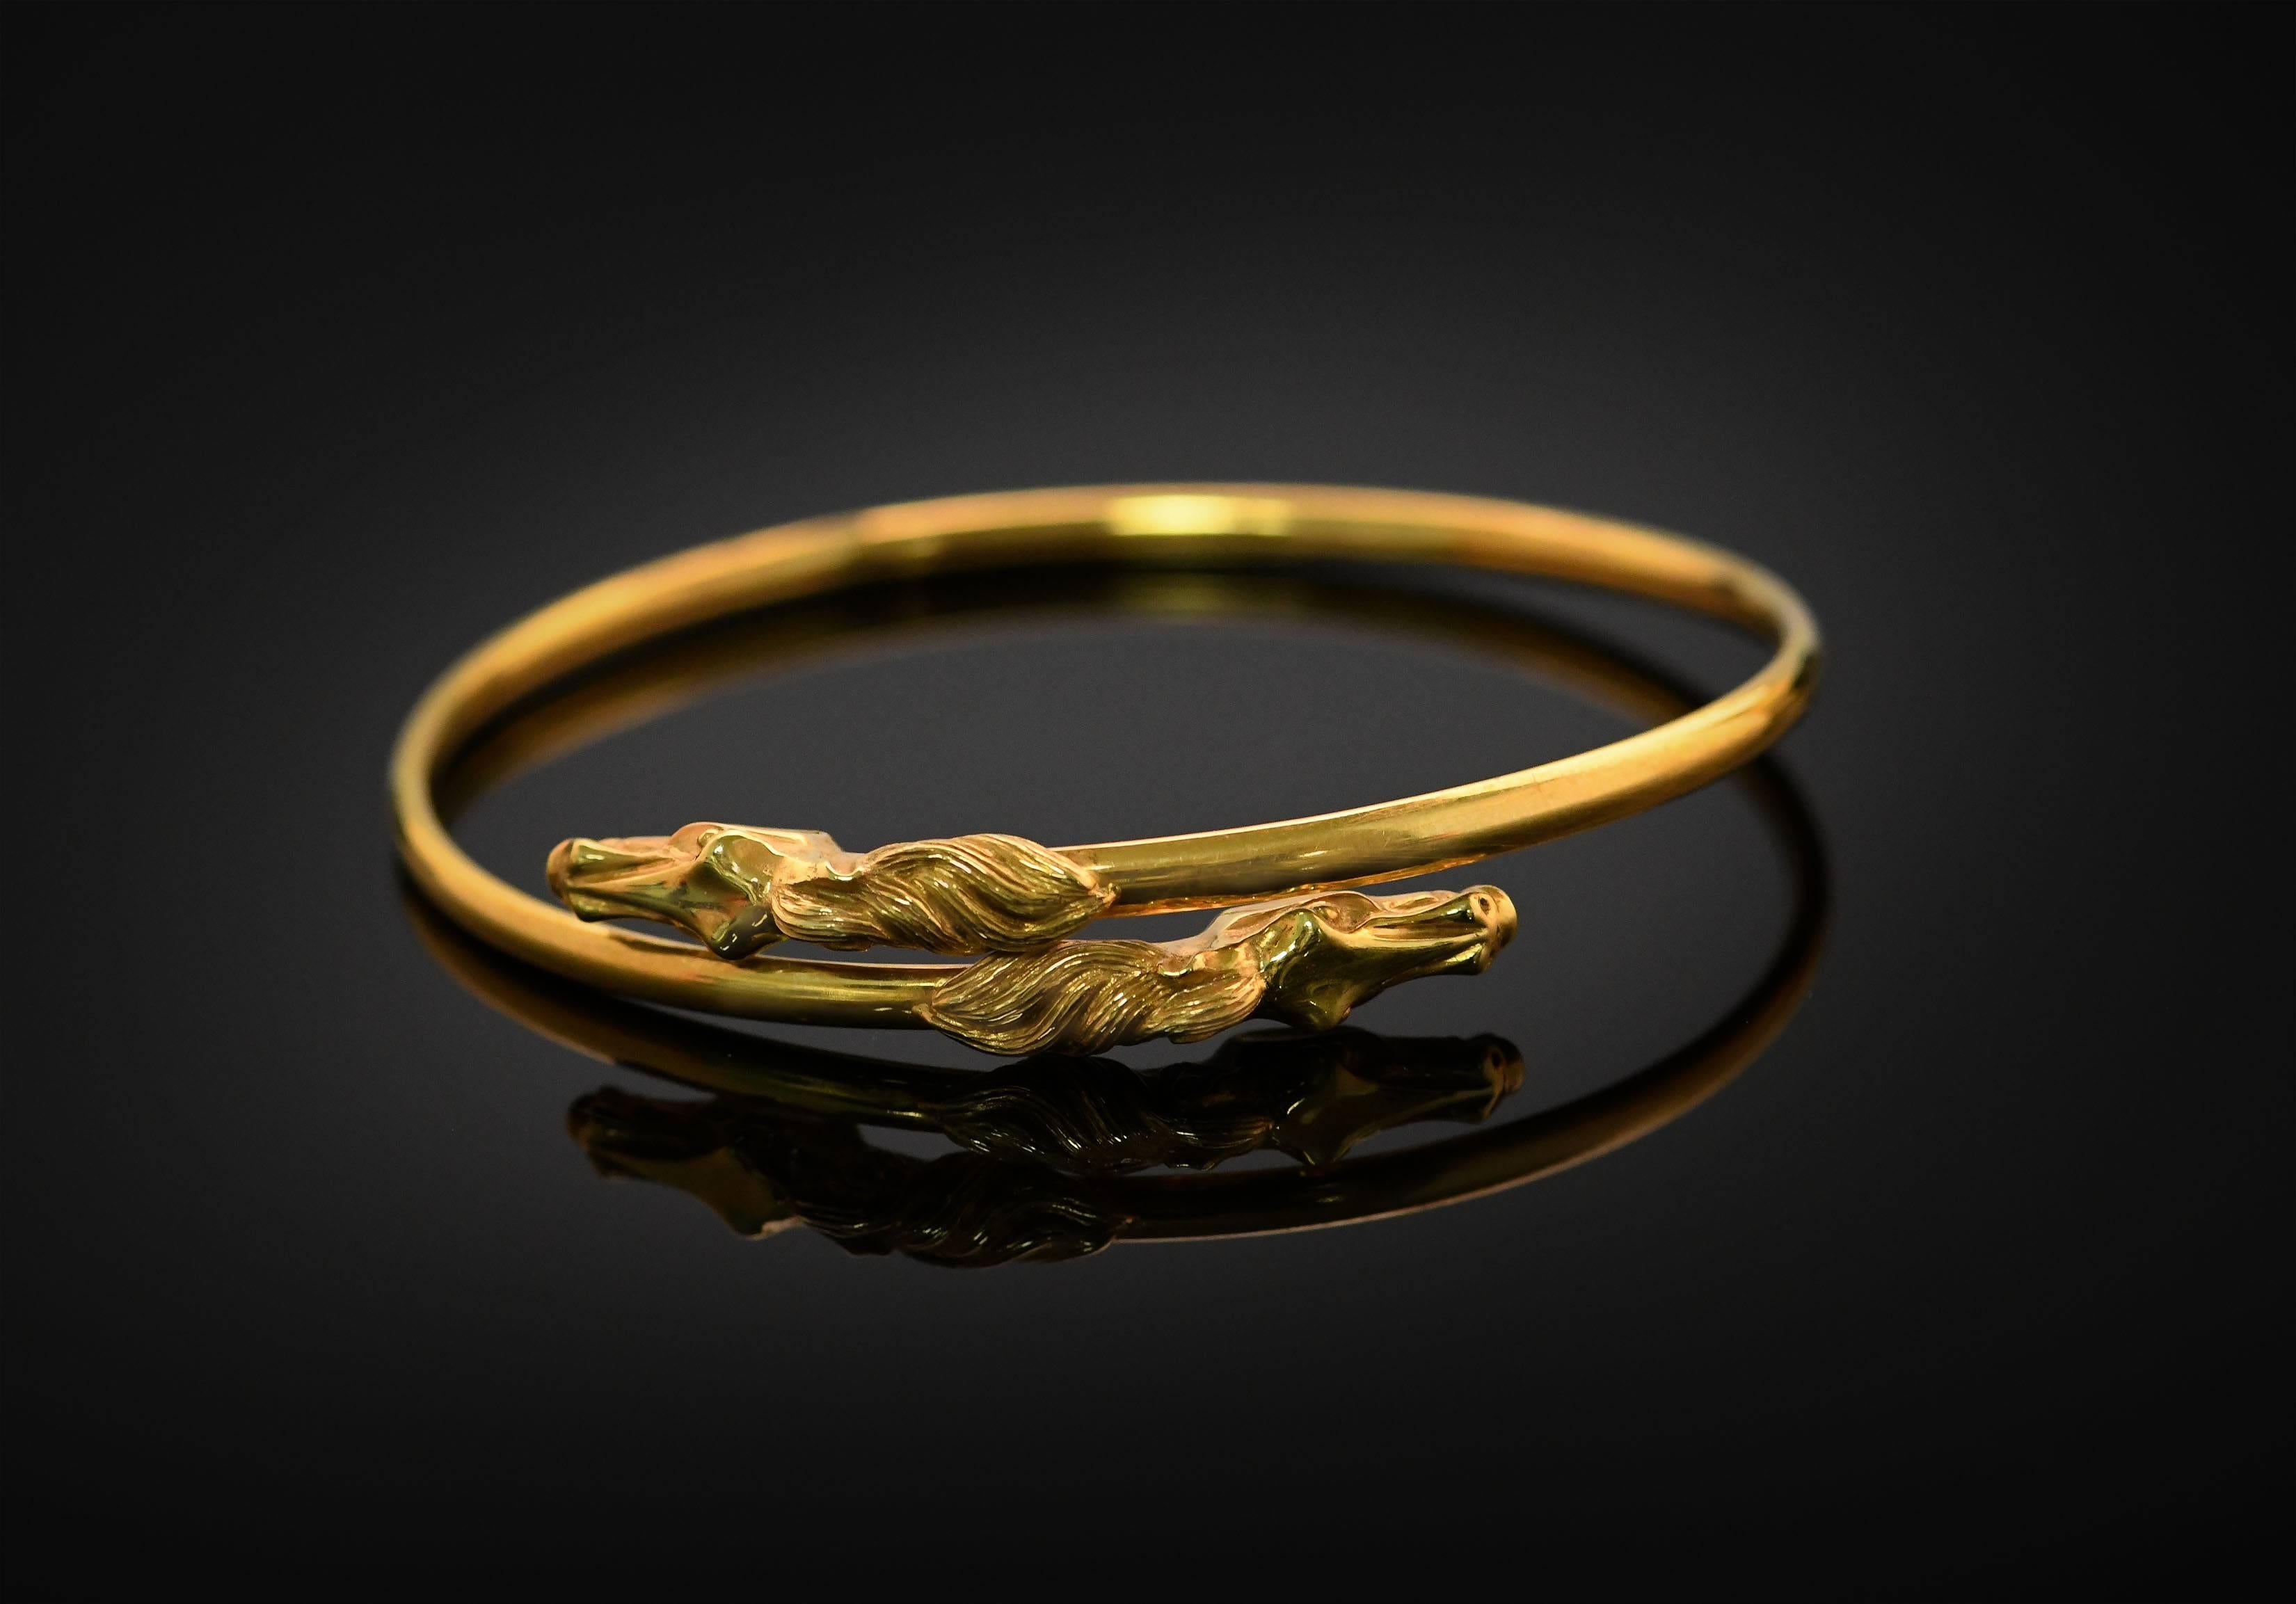 This bangle is made in an Art Nouveau style. The horse's heads thrust forward in the thrill of speed. The flowing manes add to the feeling of movement and speed. The lines and contours of the heads lend the bangle a sinuous beauty. 

This is